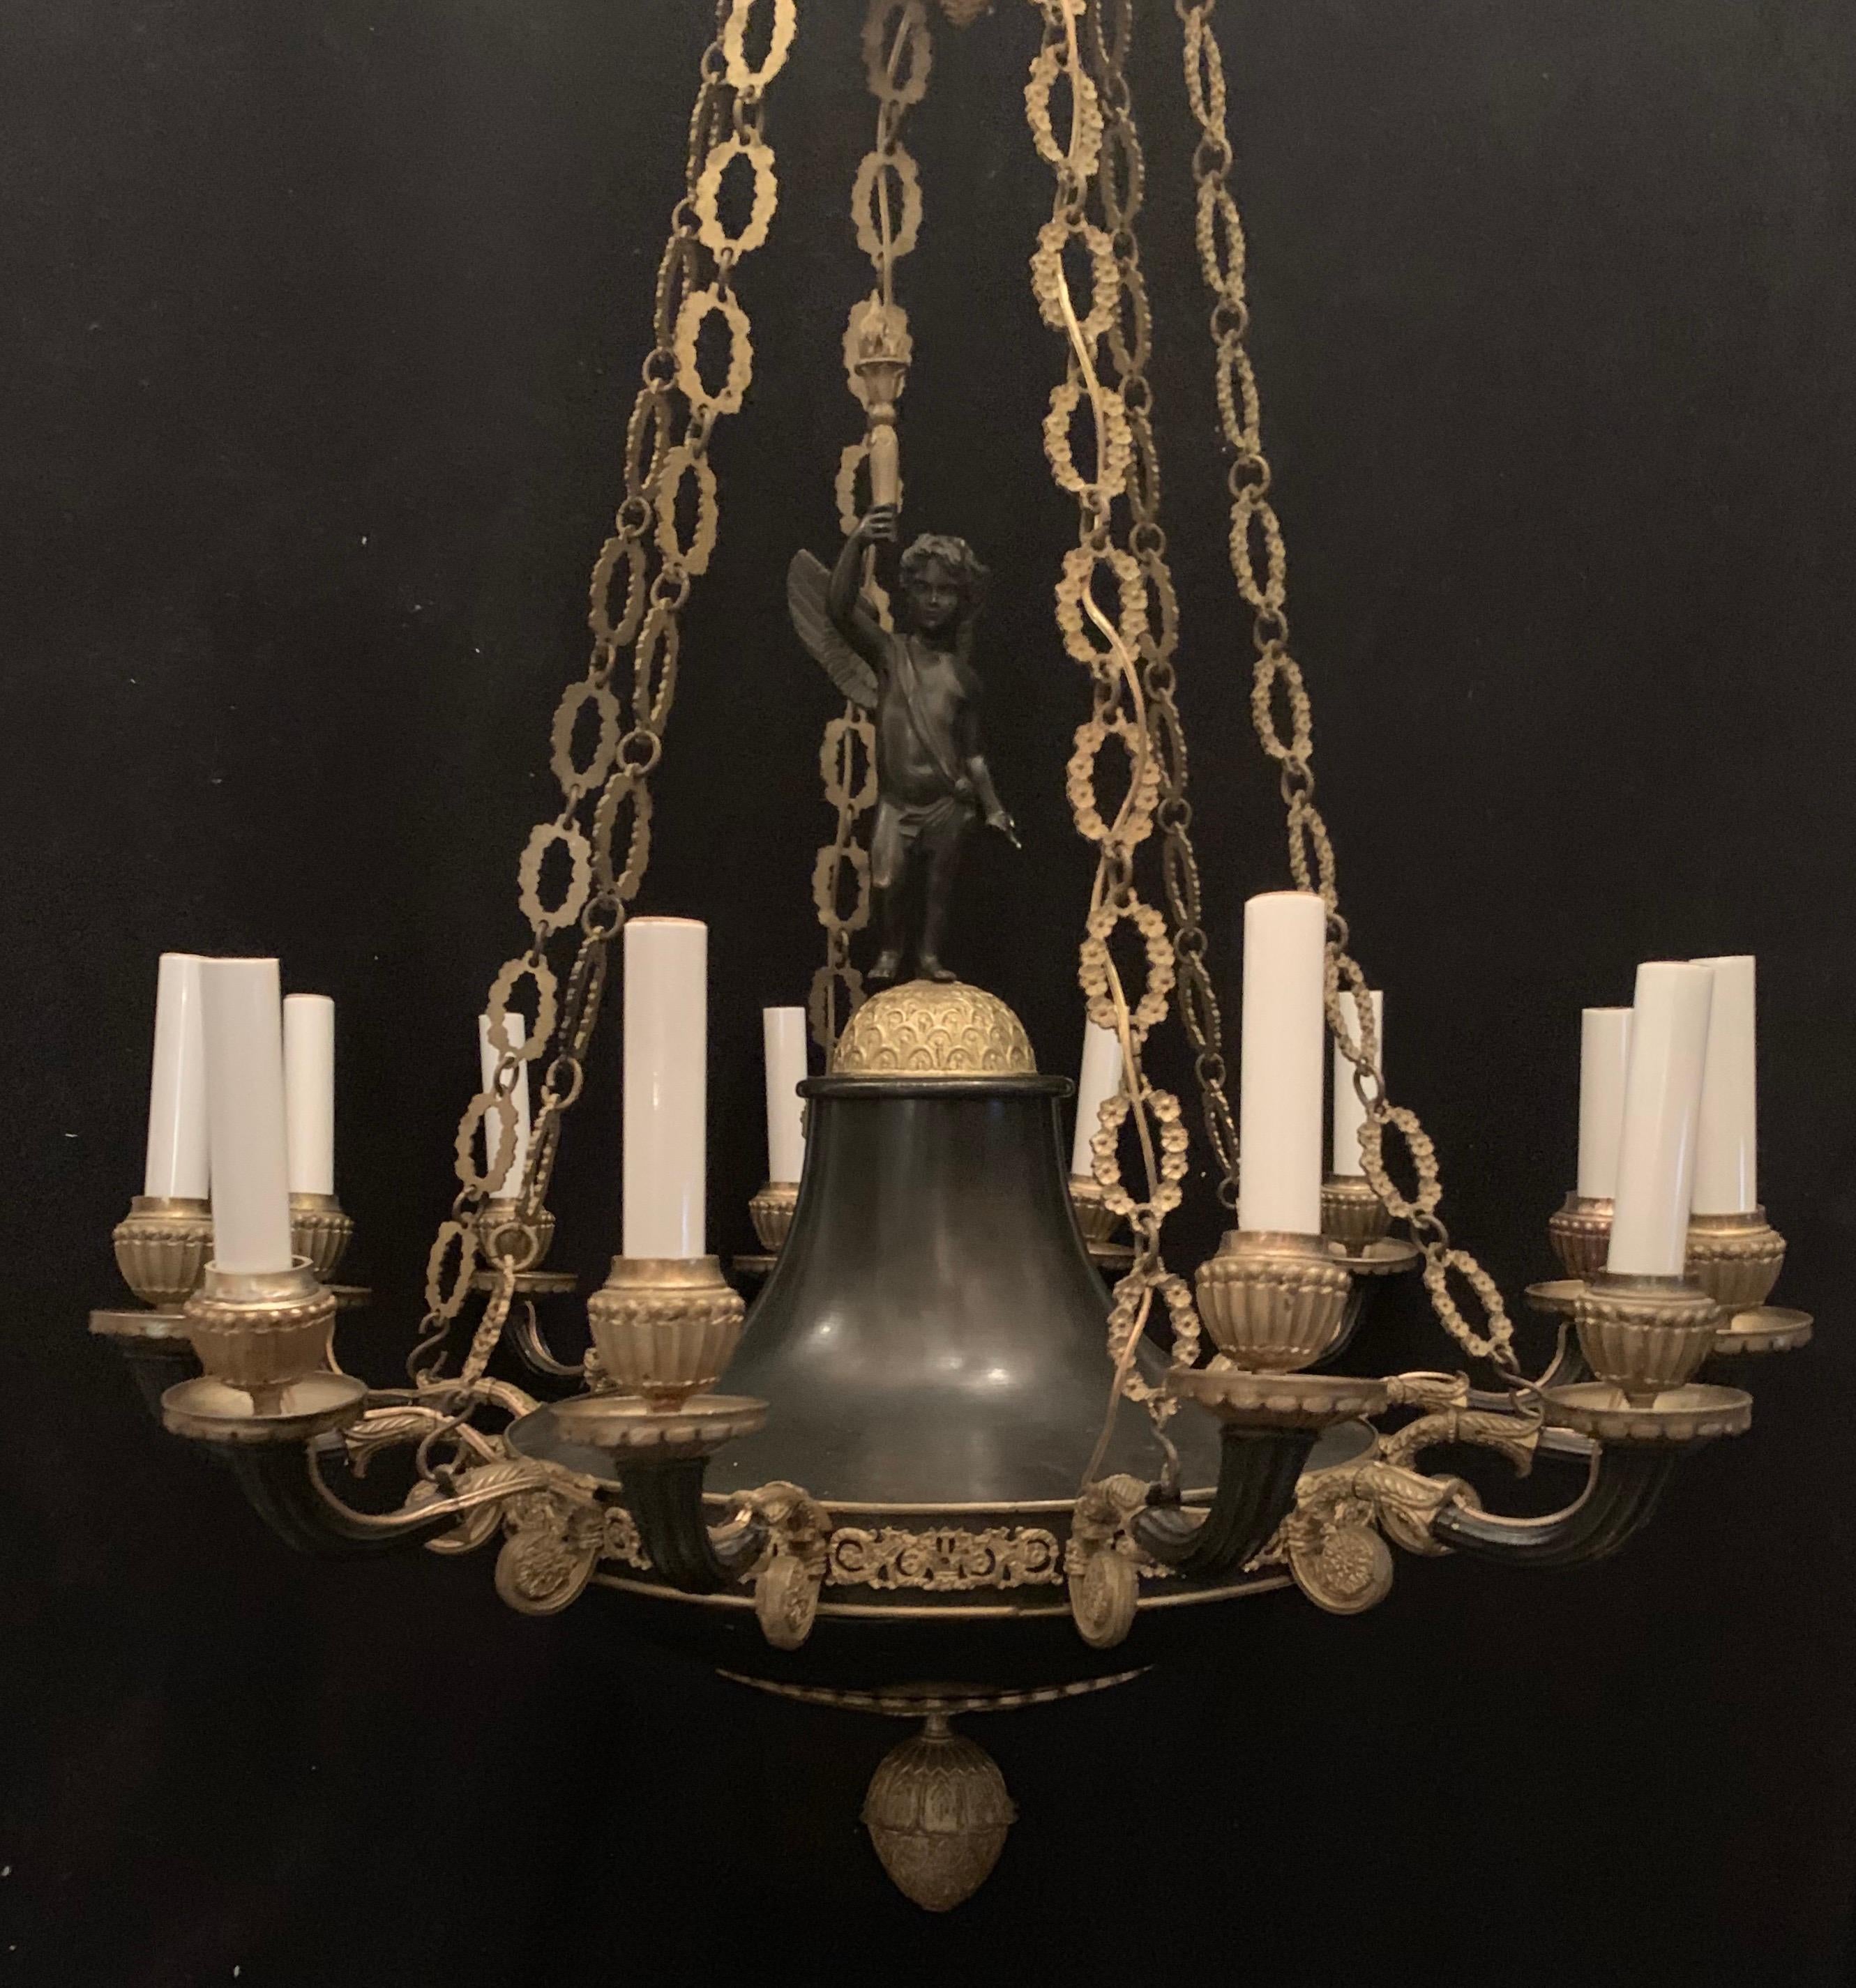 A wonderful French Empire doré and patinated bronze two-tone neoclassical cherub center medallion 12 light chandelier completely rewired with new candelabra sockets

Currently 26